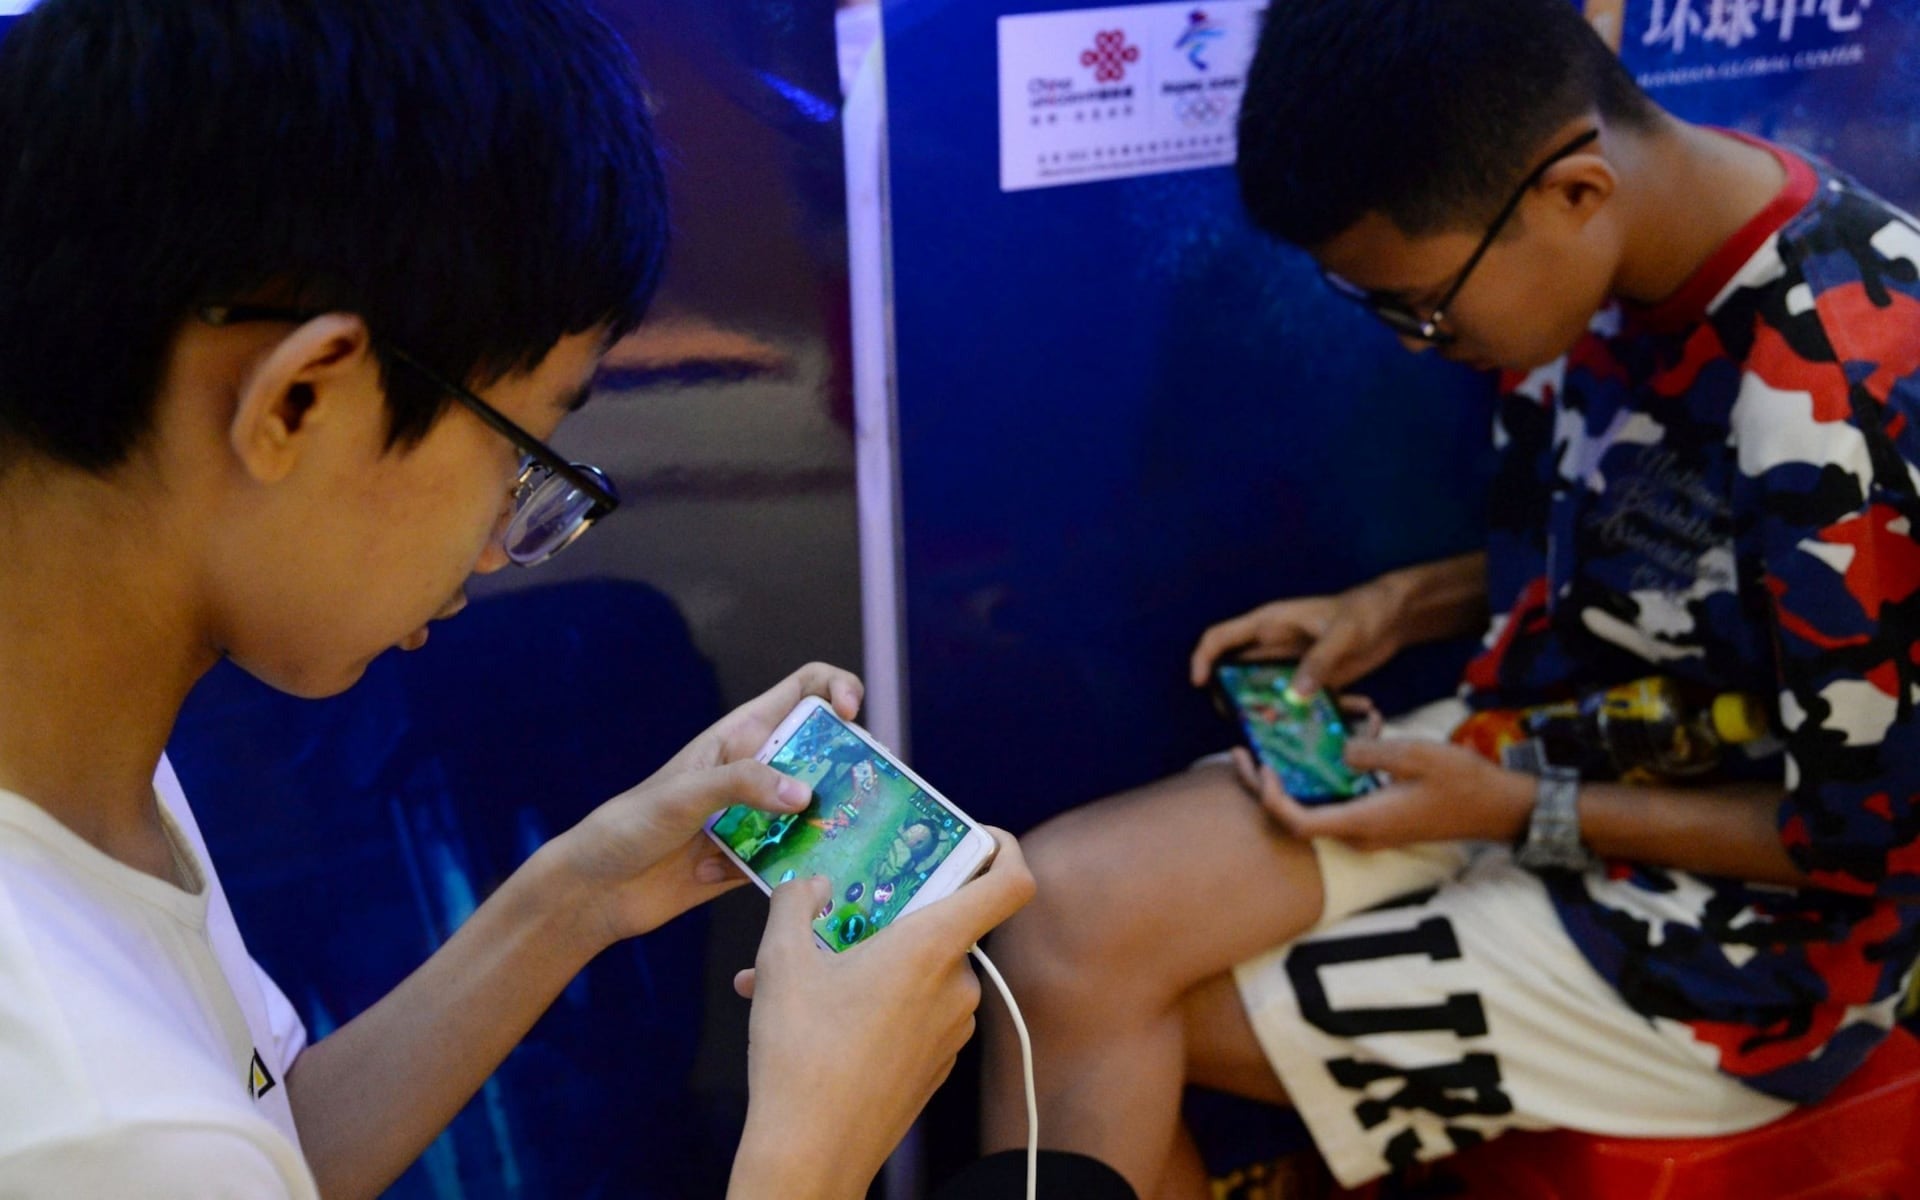 No More Video Games for Kids Under 18 For More Than 90 Mins & After 10pm, China Says - WORLD OF BUZZ